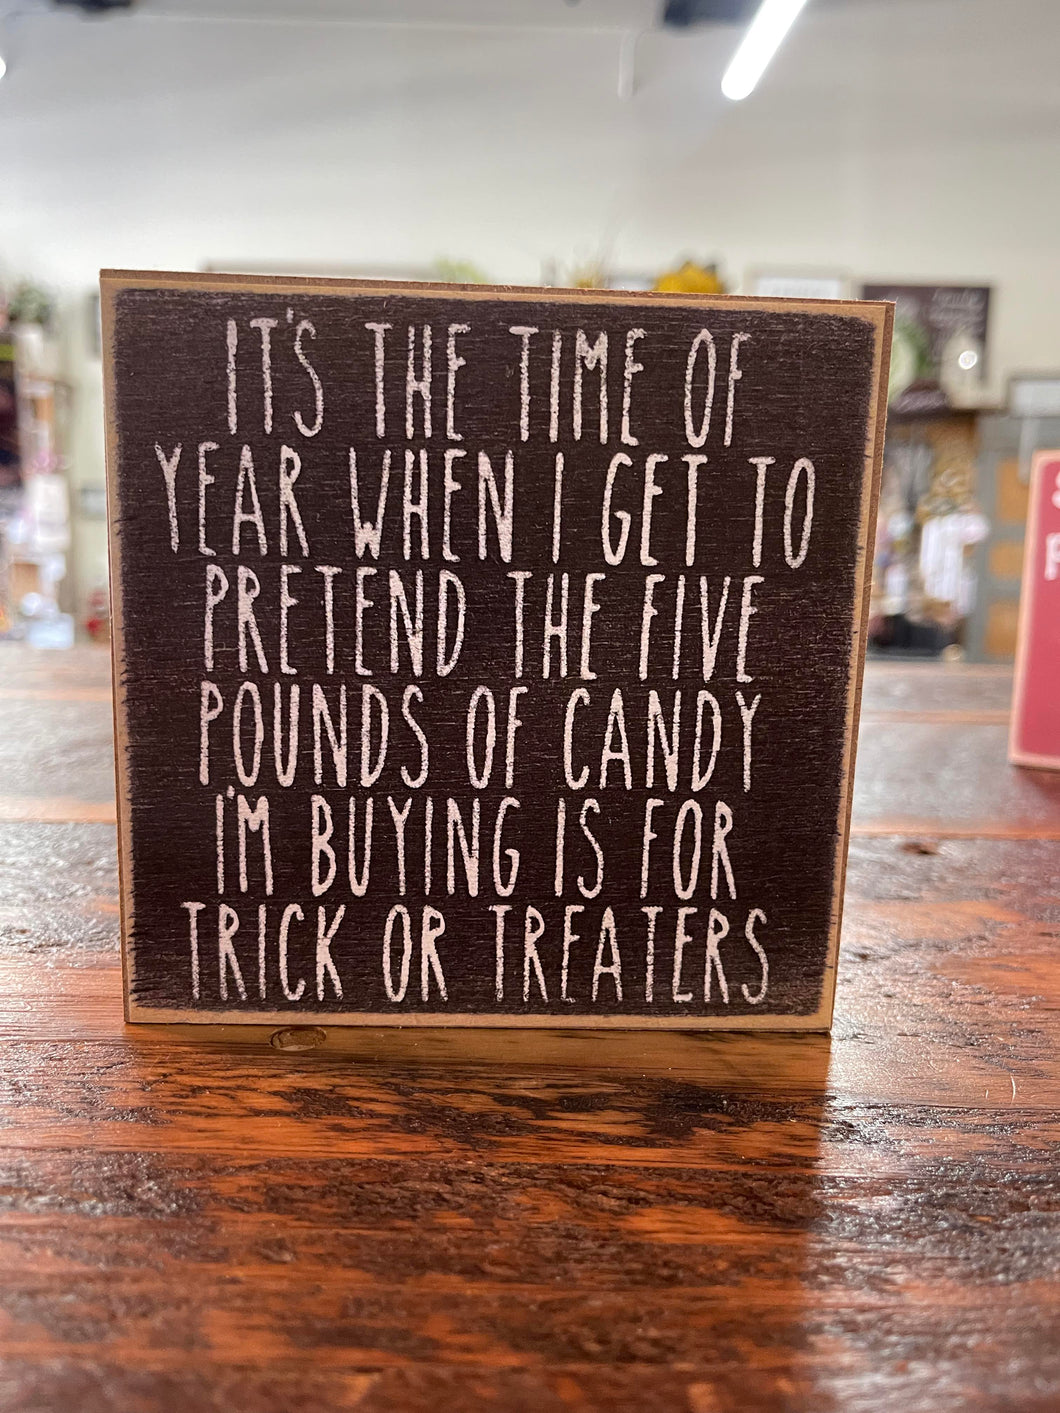 Pretend to Buy For Trick or Treaters Wooden Block Sign